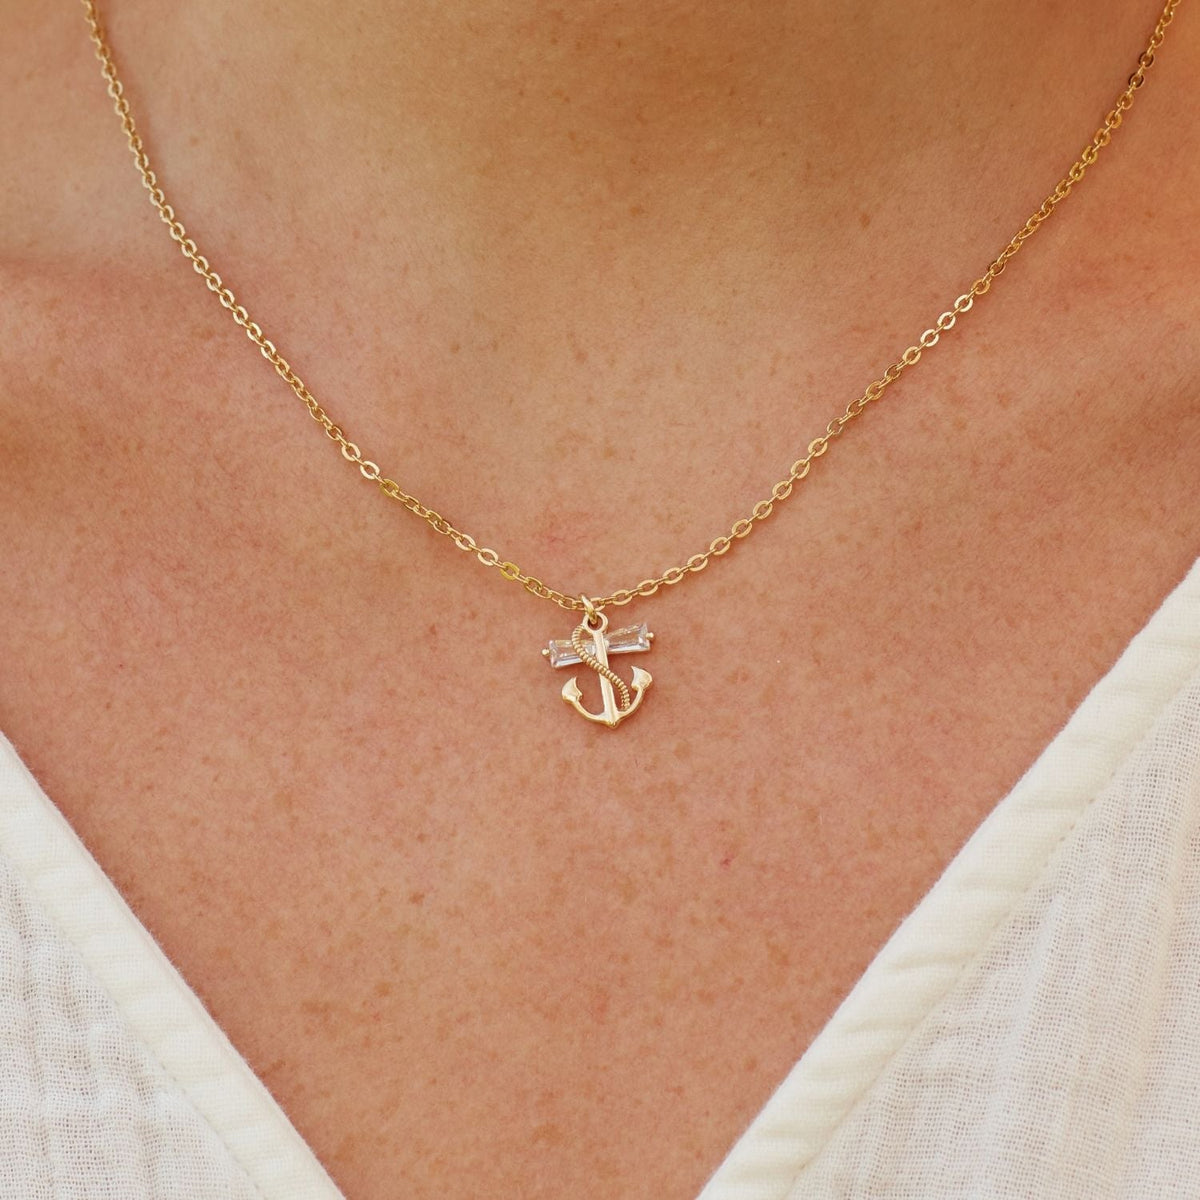 Mama of An Angel | Miscarriage Sympathy Gift | Anchor Necklace